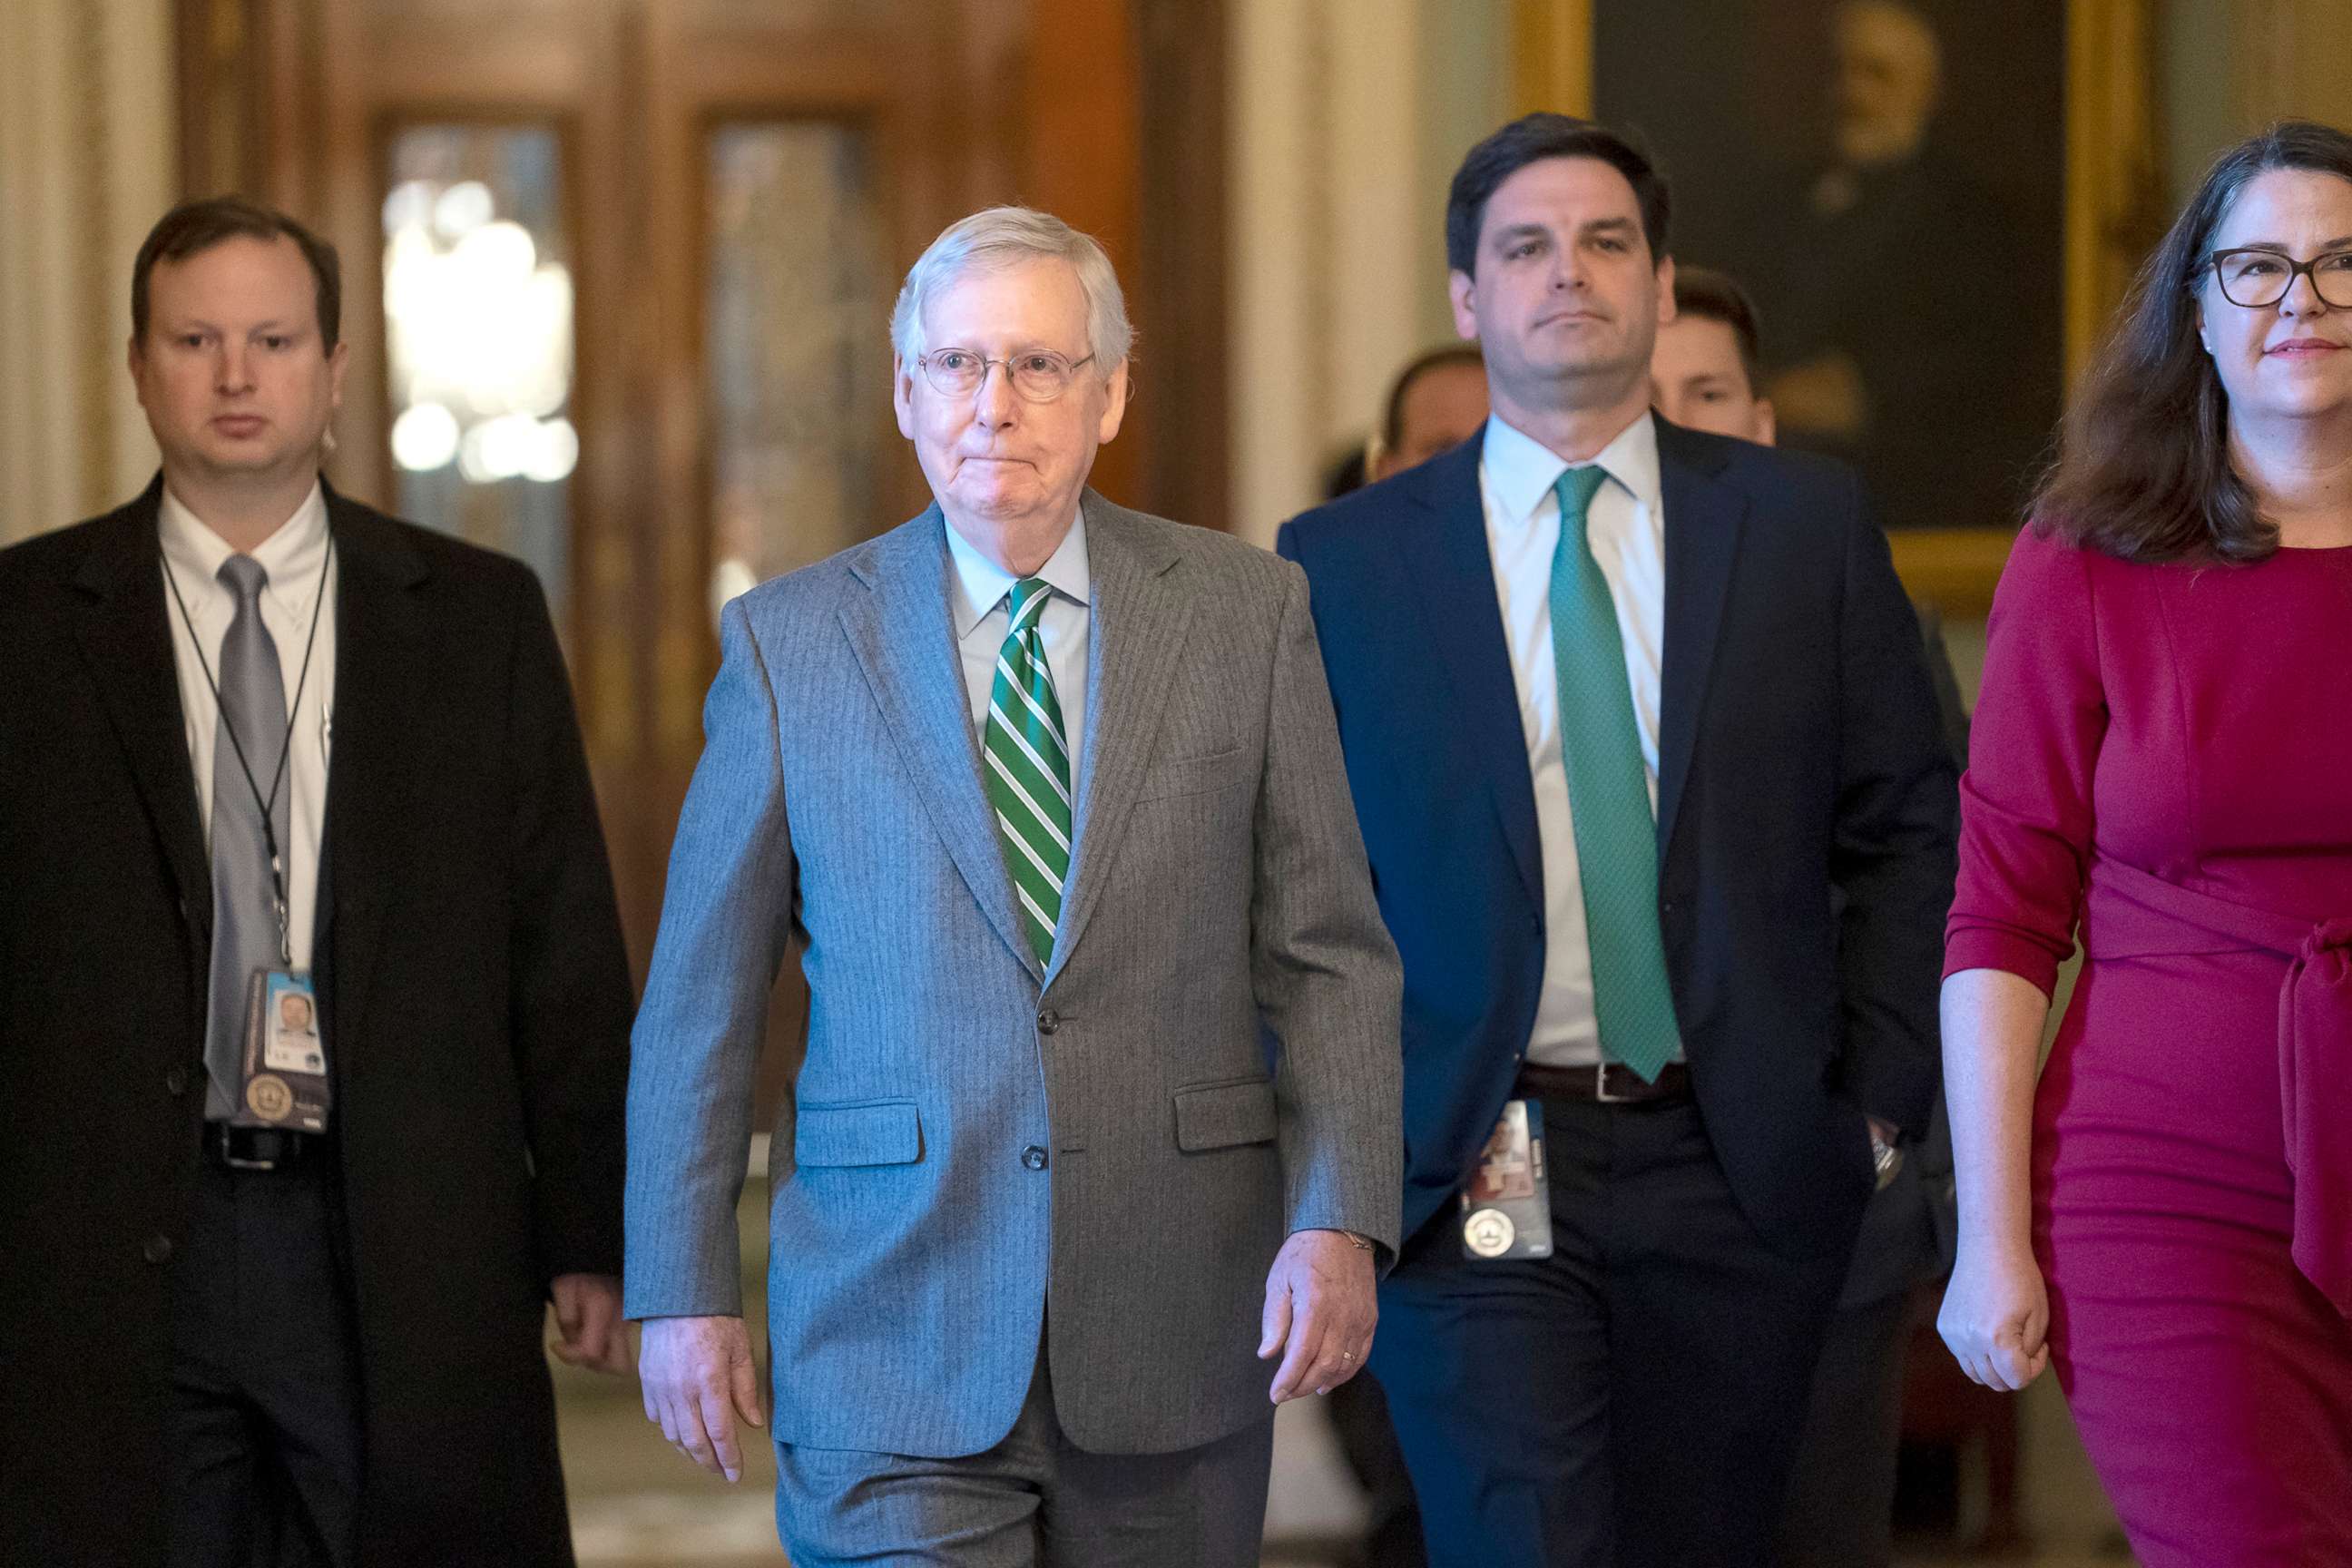 PHOTO: Senate Majority Leader Mitch McConnell, R-Ky., leaves the Senate chamber at the Capitol, Jan. 16, 2020.  